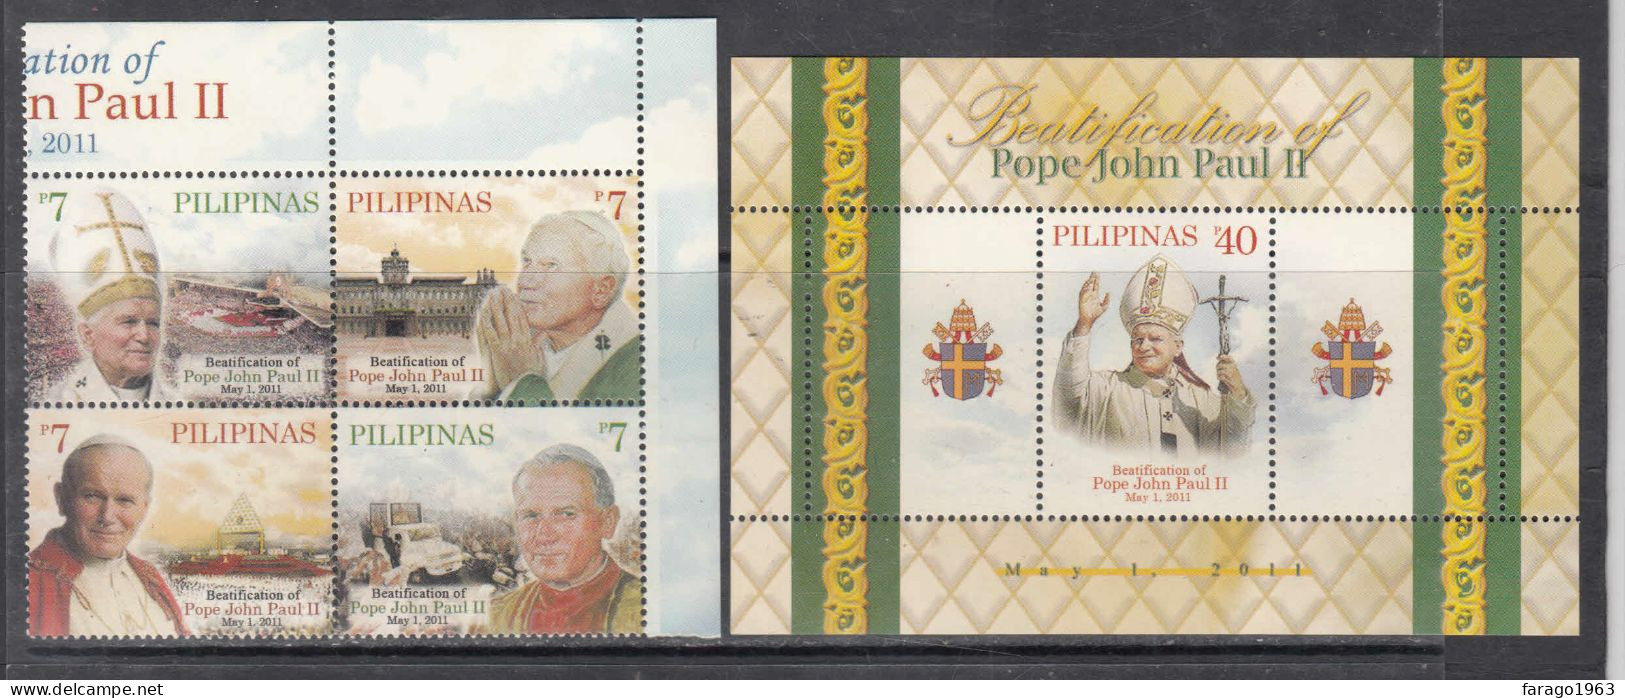 2011 Philippines Pope John Paul II Complete Block Of 4 + Souvenir SheetMNH - Philippines